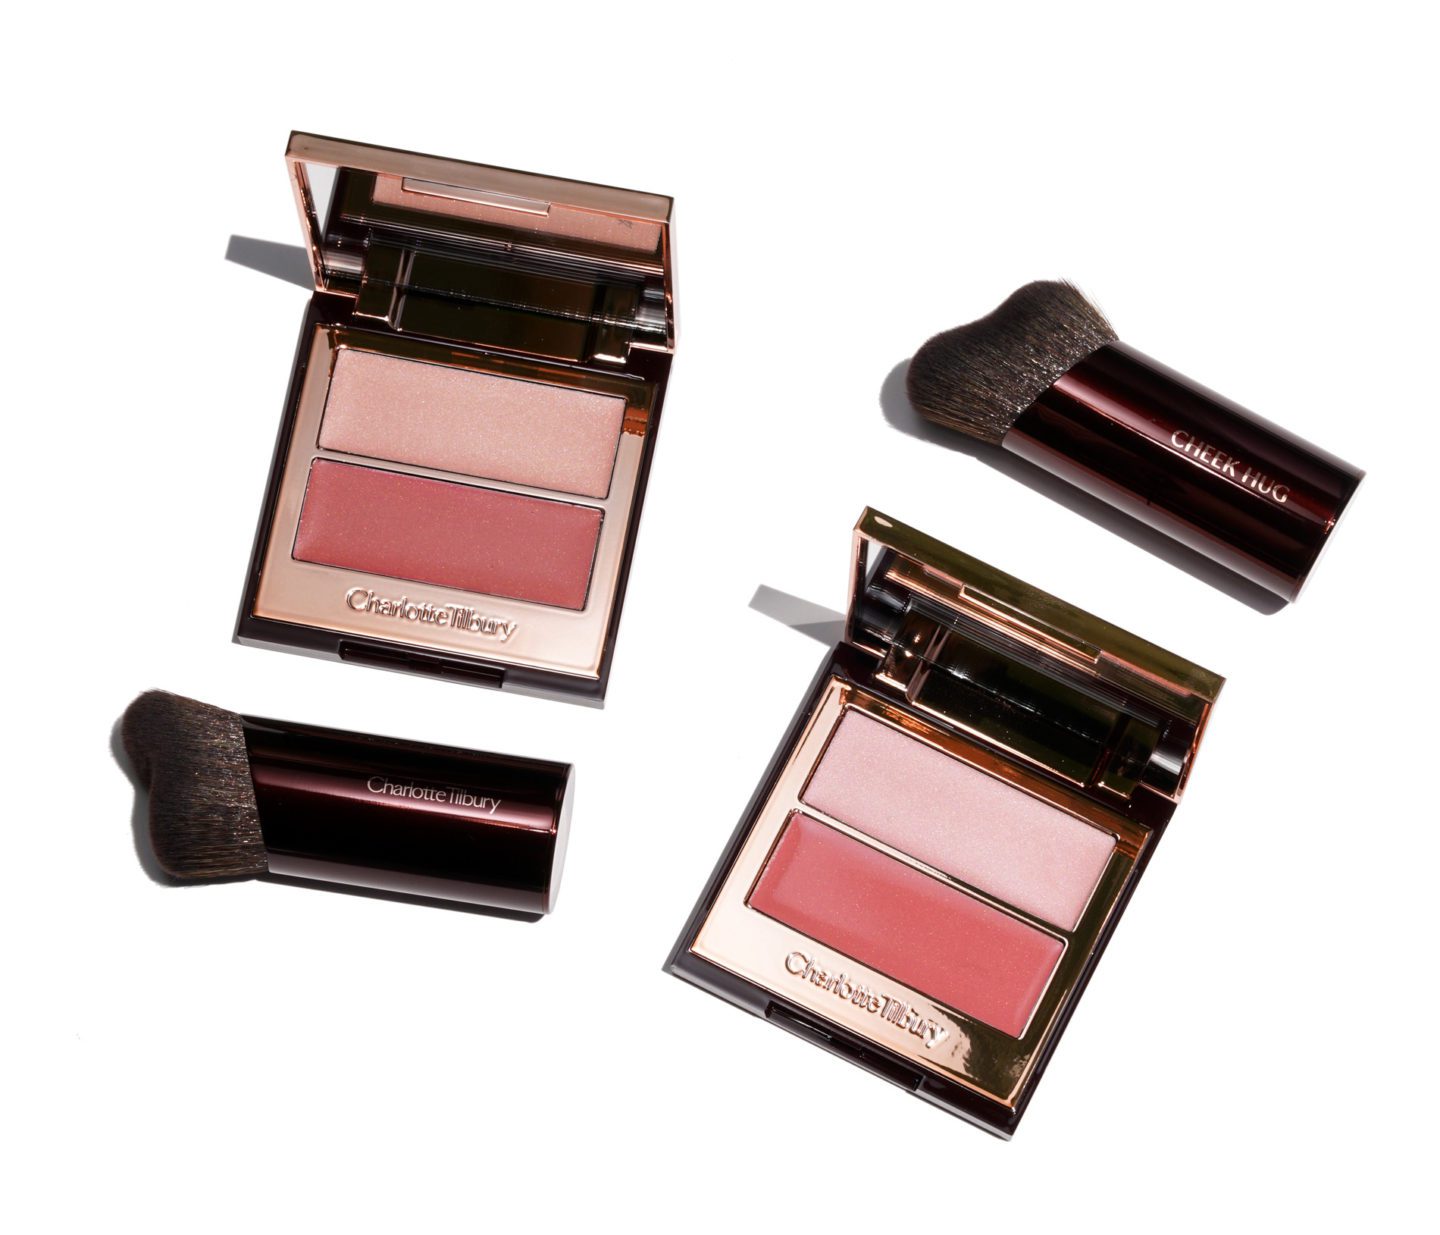 Charlotte Tilbury Pretty Youth Glow Filters Seduce Beauty and Pretty Fresh | The Beauty Look Book